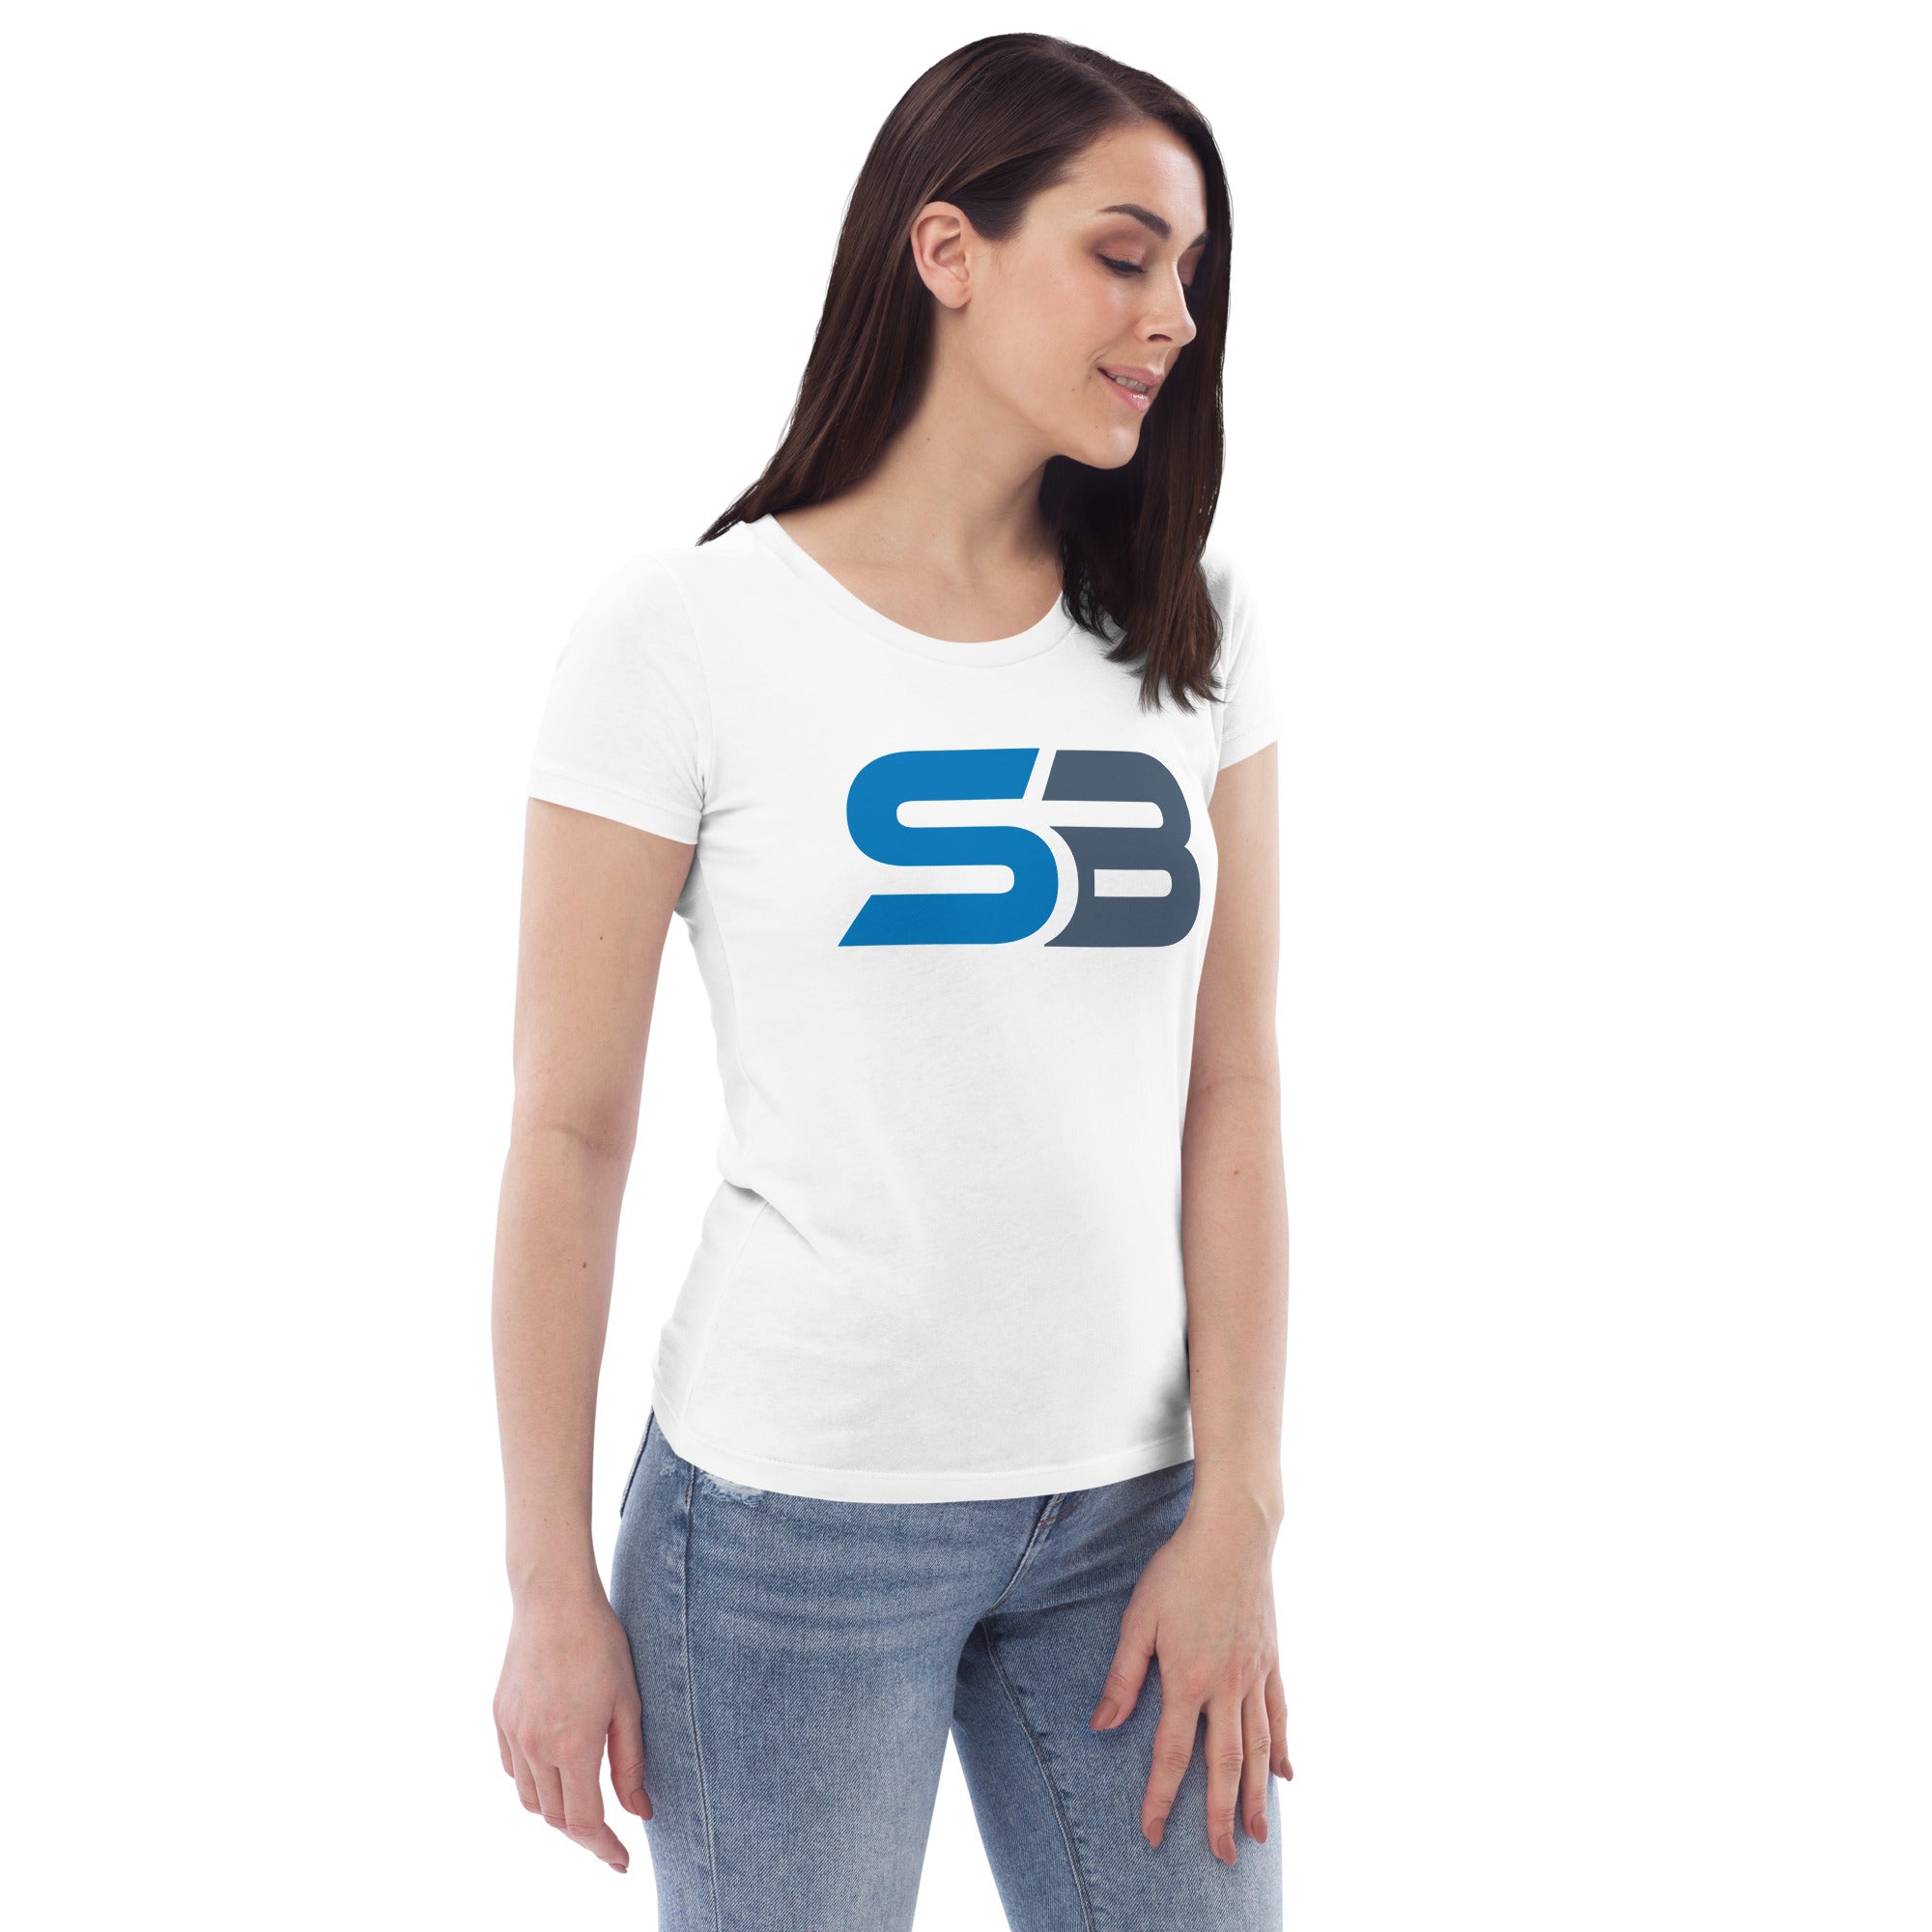 Smart Bodies Women's fitted eco tee V2